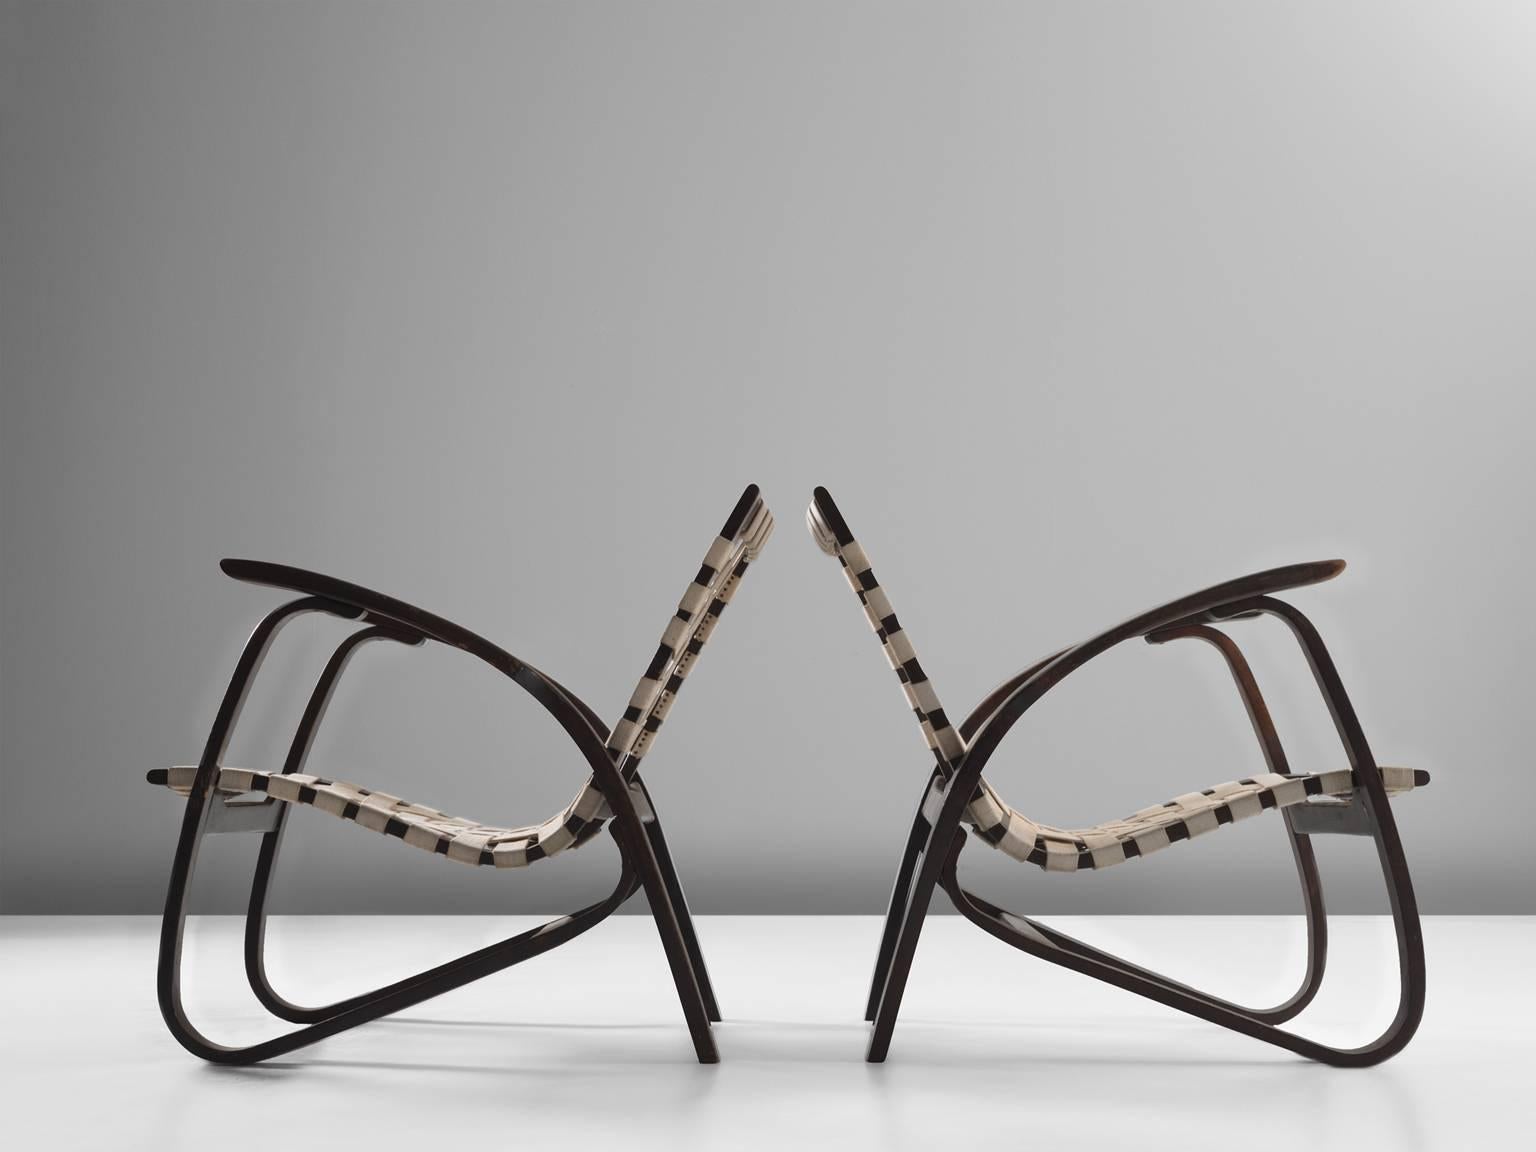 Pair of lounge chairs, in wood and canvas, by Jan Vanek for UP Zavodny, Czech Republic, 1930s.

Stunning pair of dynamic armchairs designed by Czech architect Jan Vanek (1891-1962), who was a contemporary of Jindrich Halabala (1903-1987). These